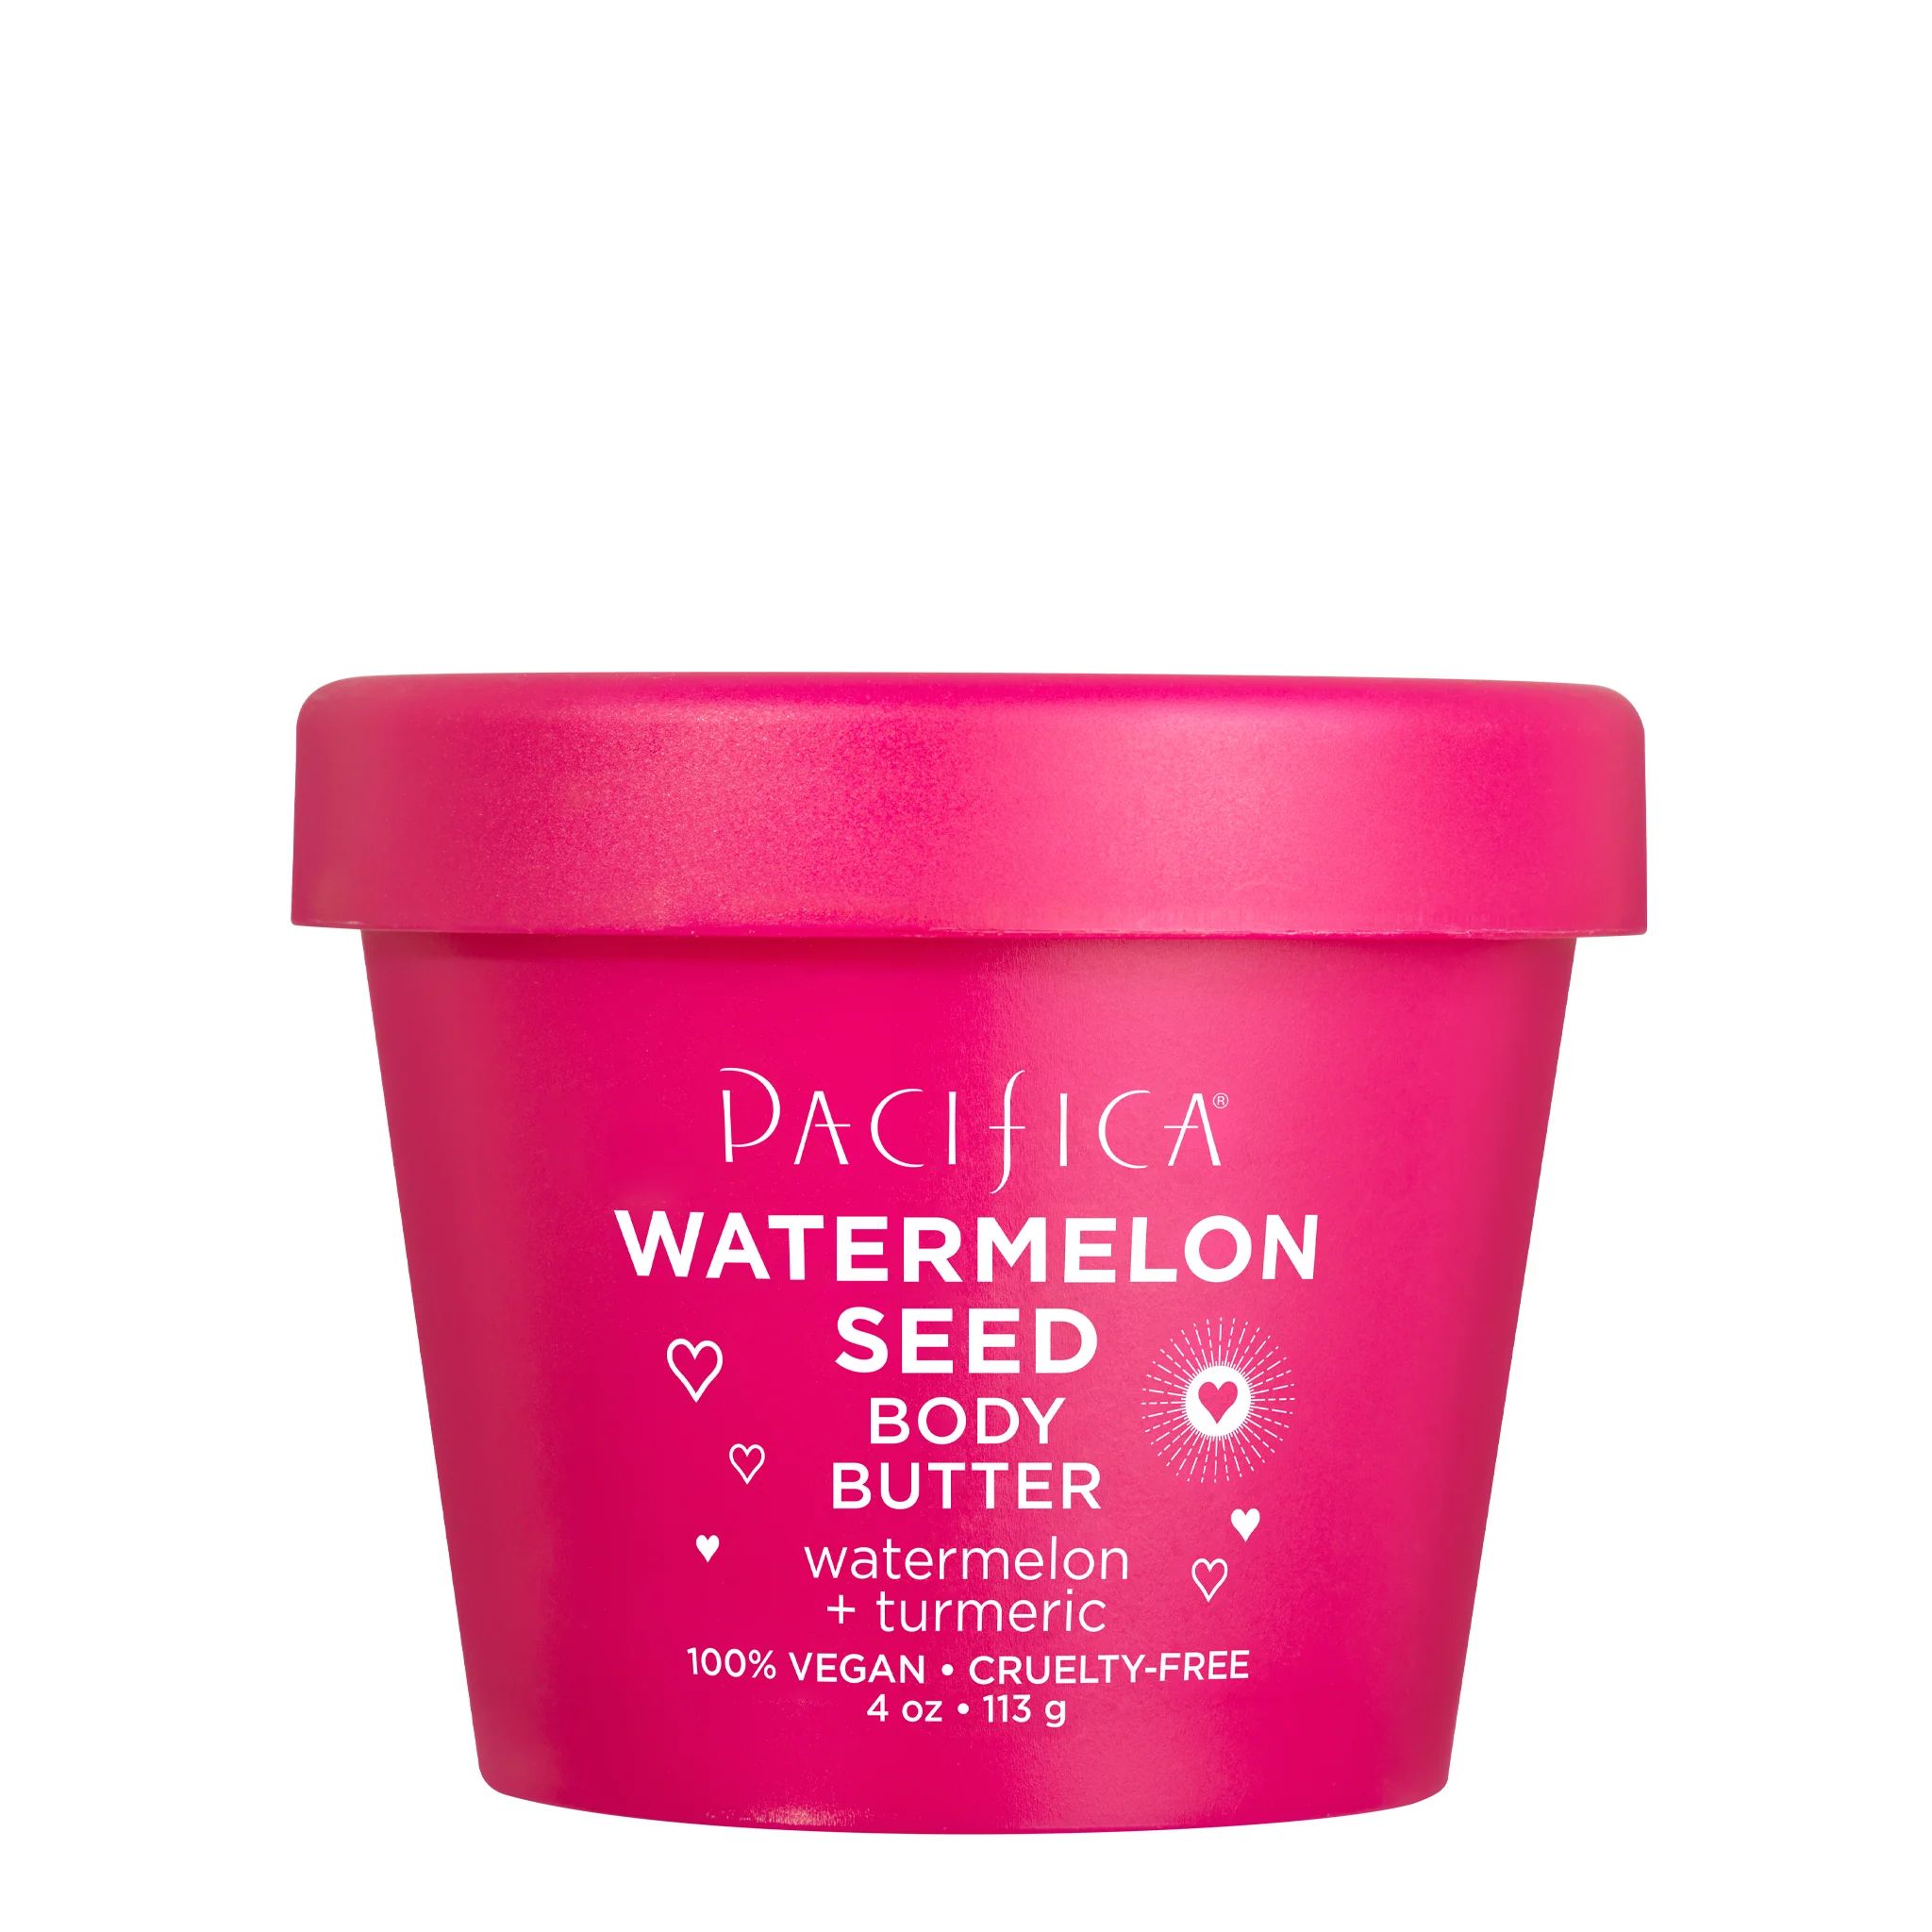 Watermelon Seed Body Butter | Pacifica Beauty